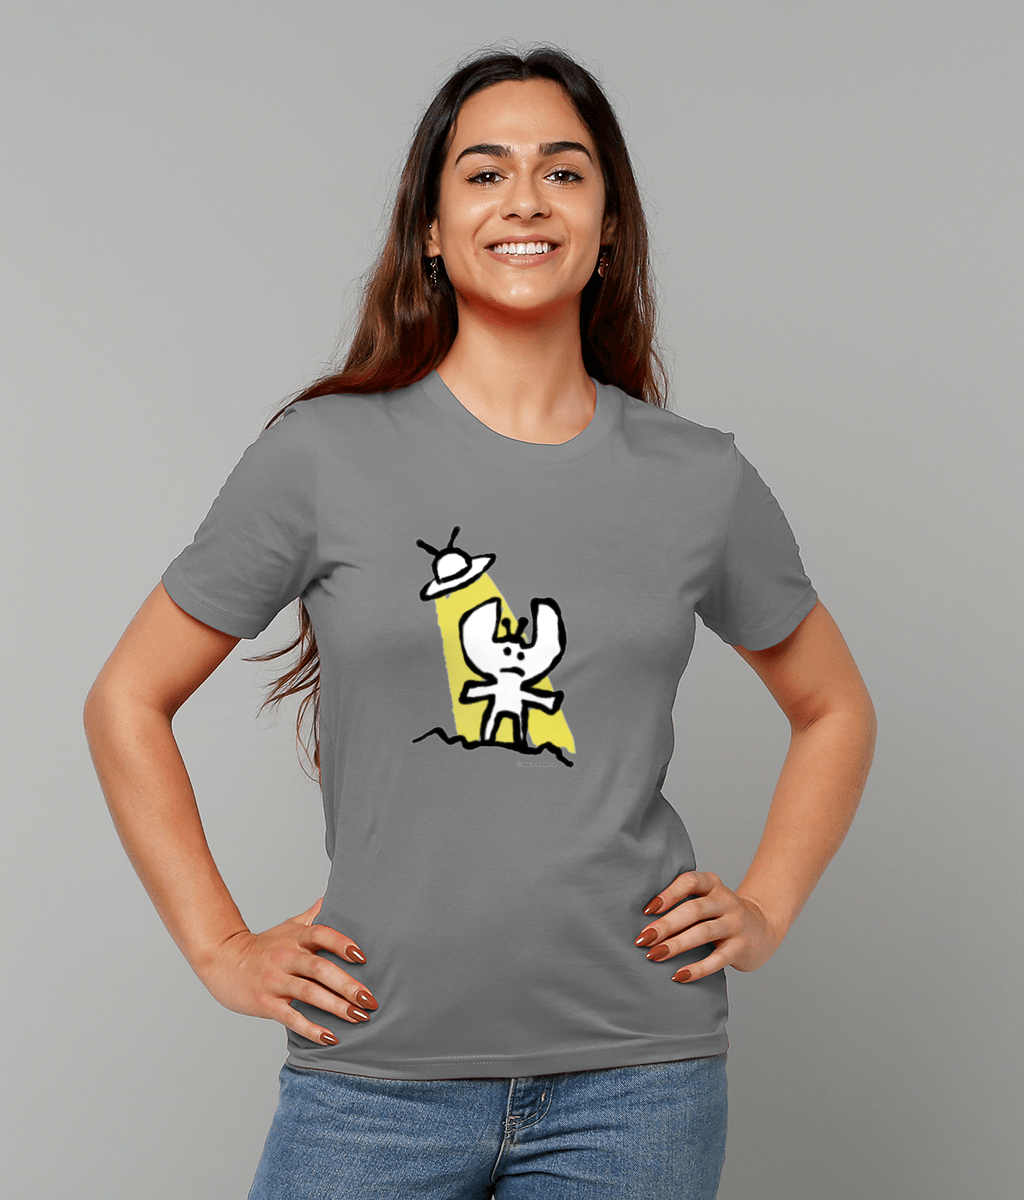 Alien T-shirt - Young woman casually wearing a cute Alien t-shirt illustrated on a mid heather grey quality t-shirt by Hector and Bone